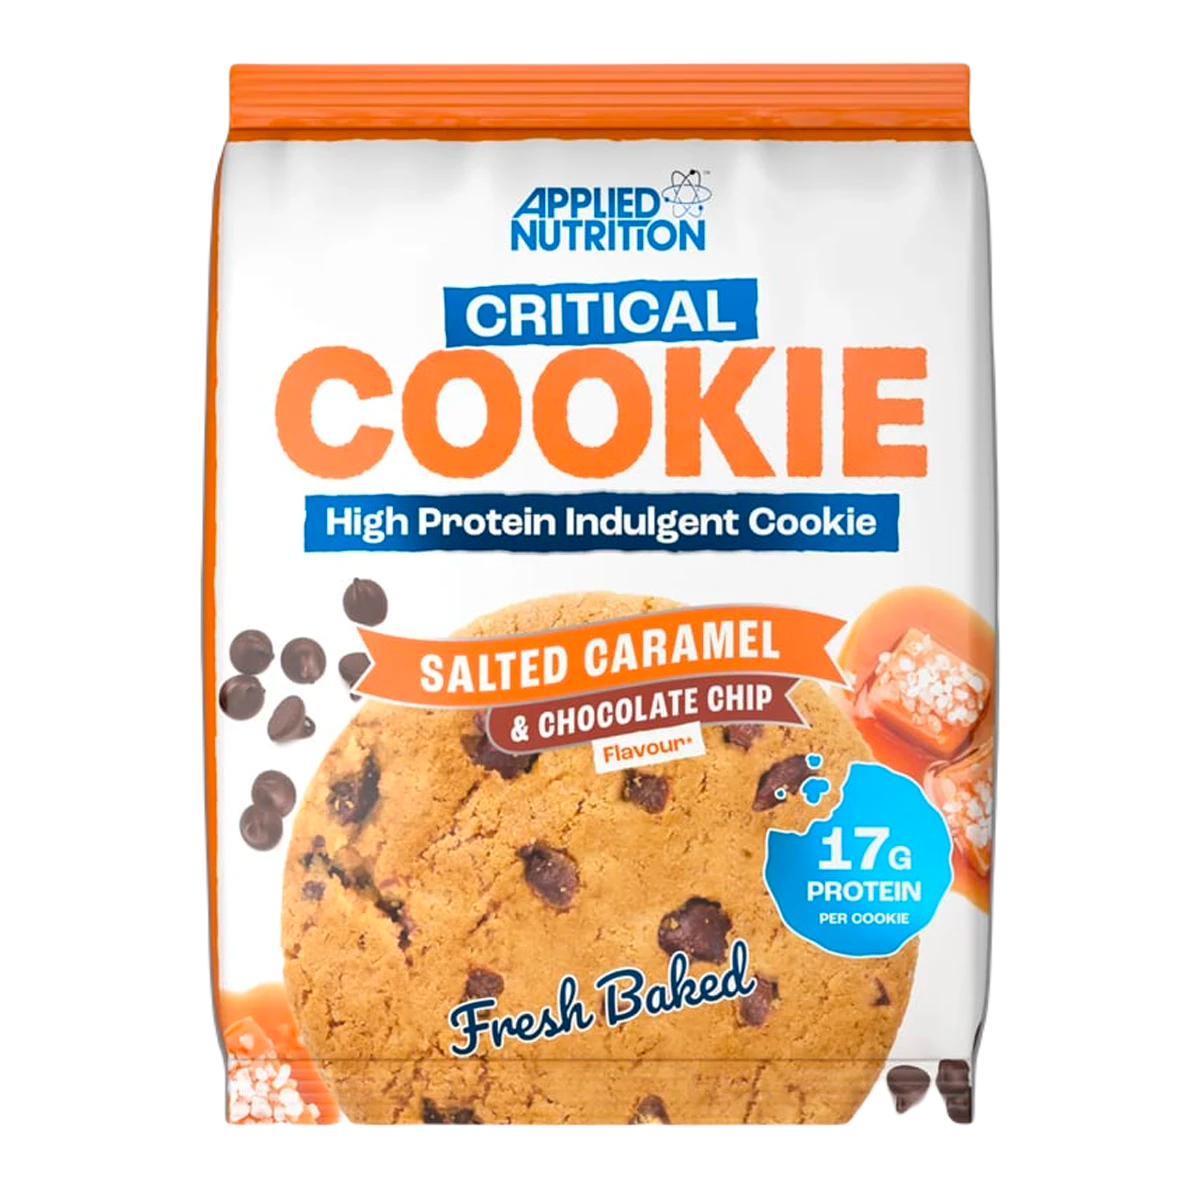 CRITICAL COOKIE APPLIED NUTRITION